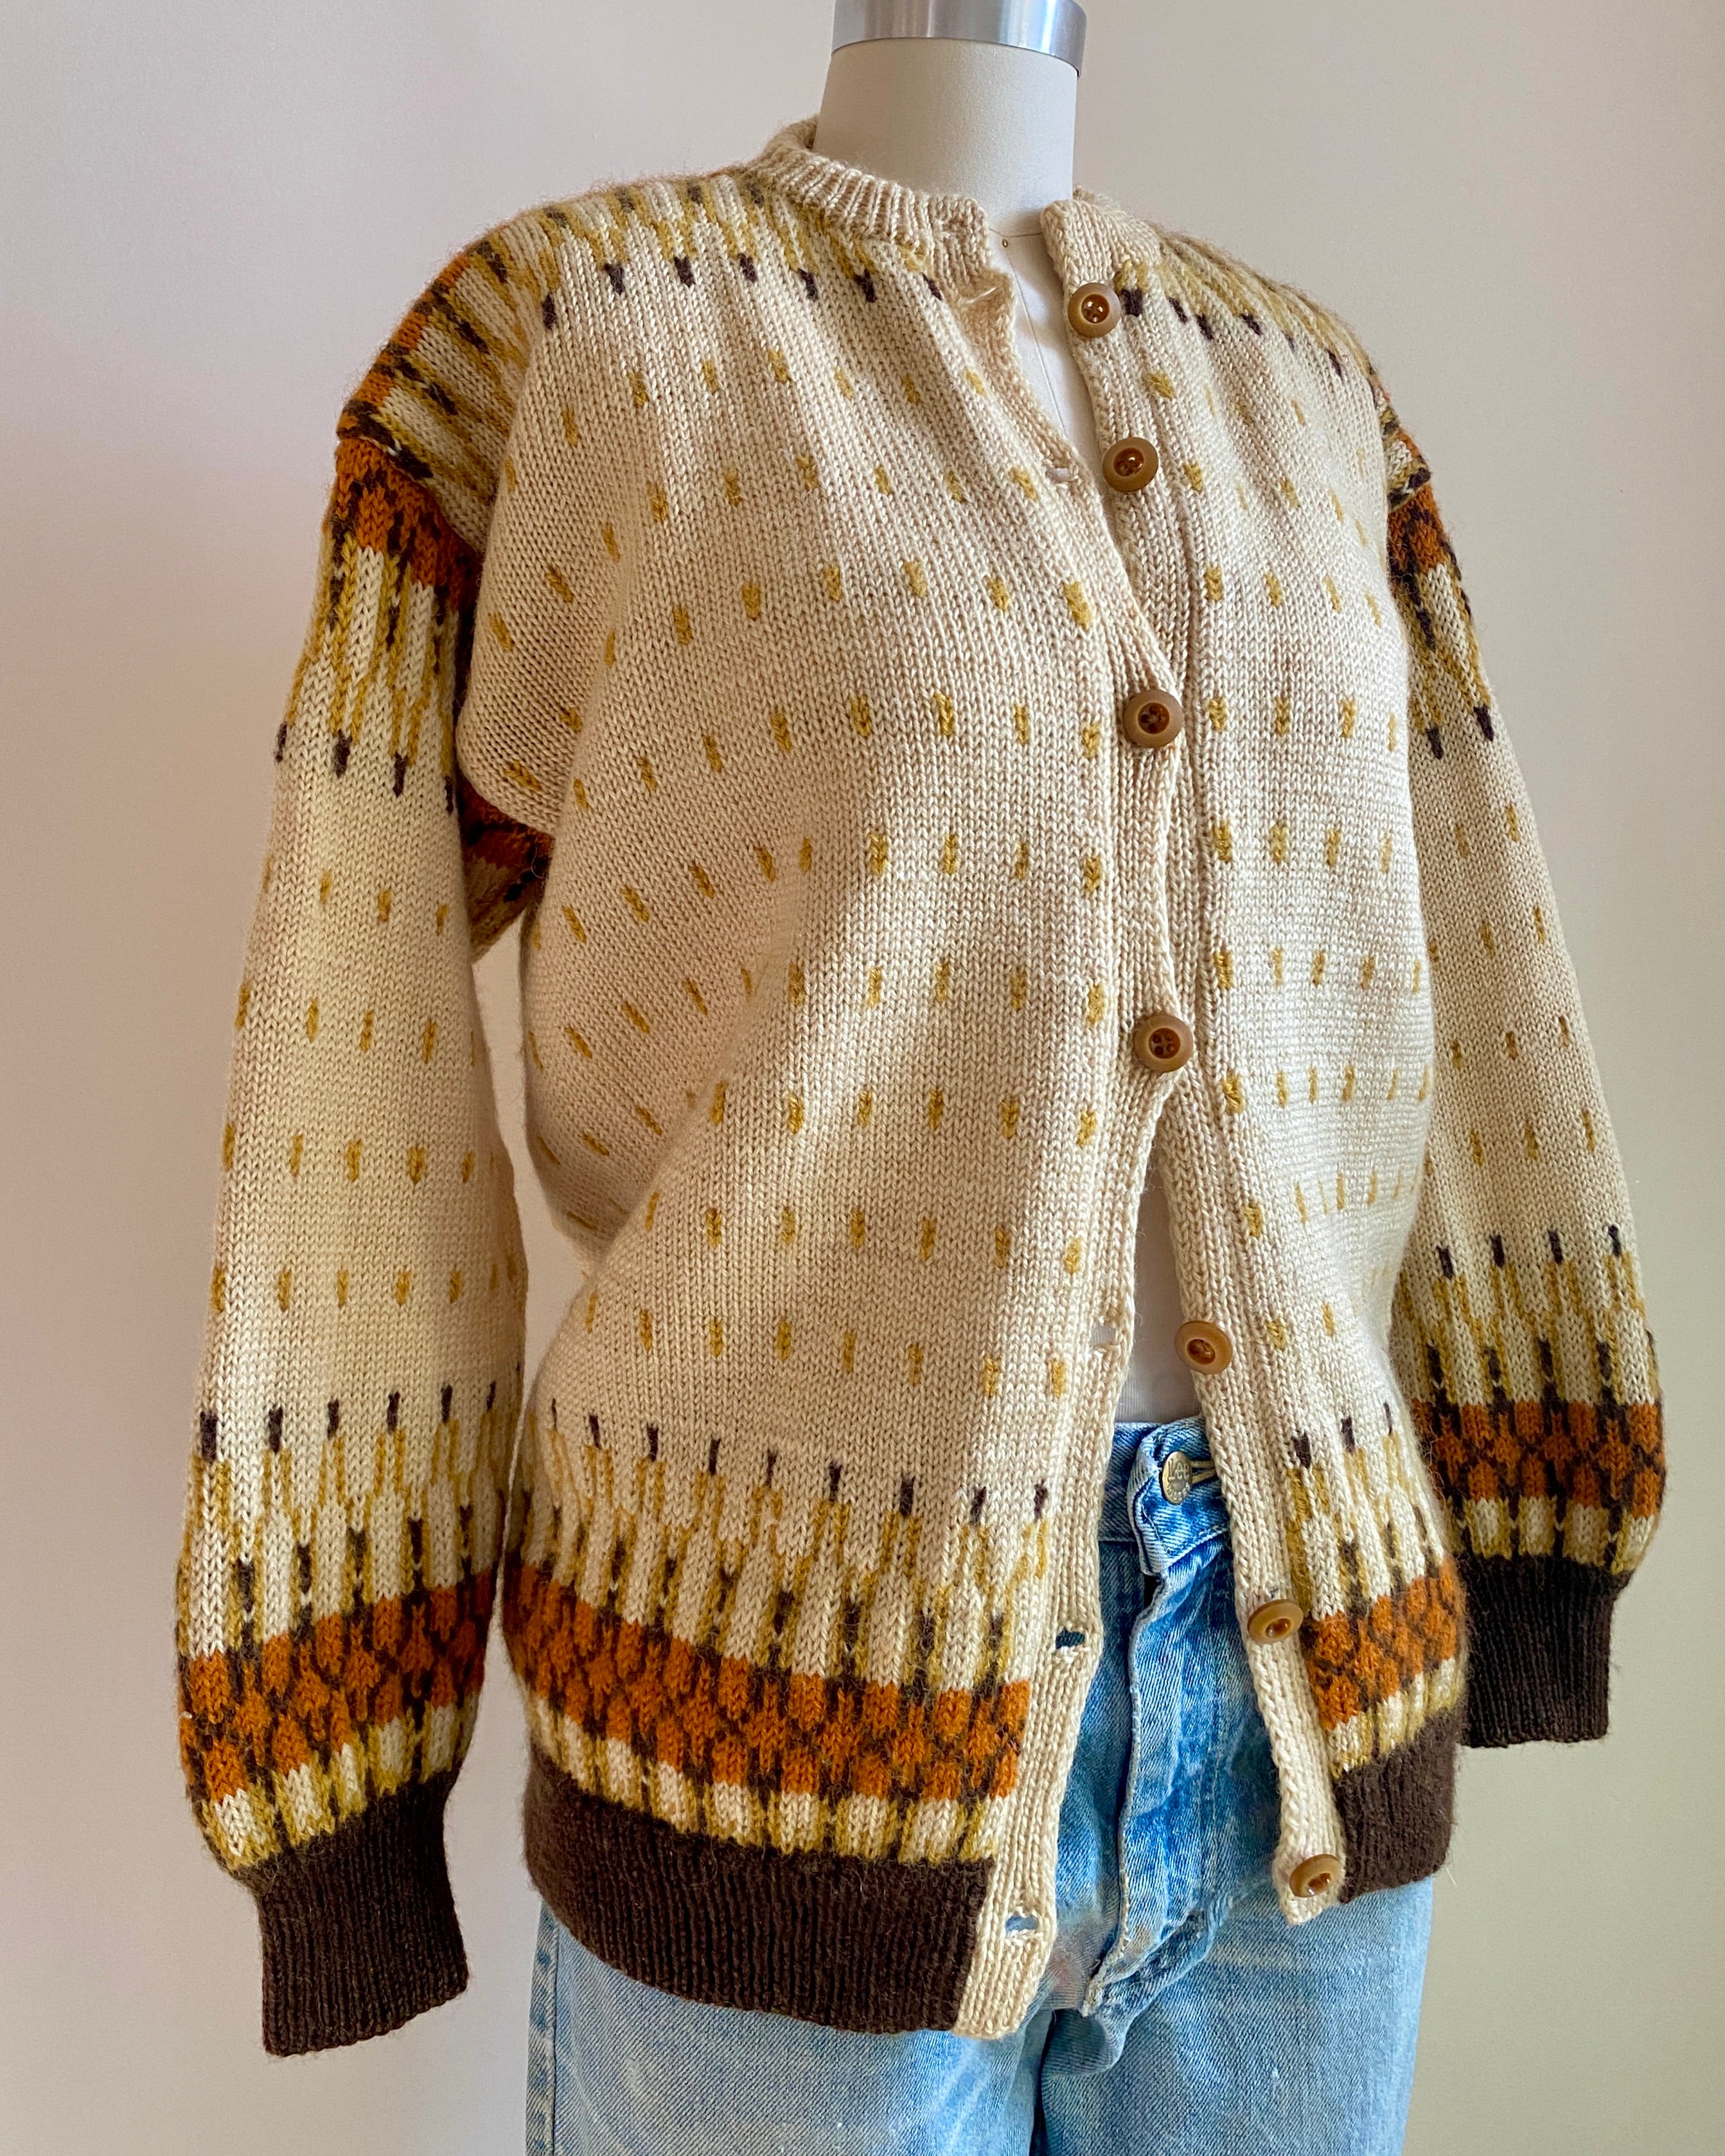 VINTAGE 1950s 1960s Hand Knit  Fair Isle Wool Tan and Brown Cardigan S or M